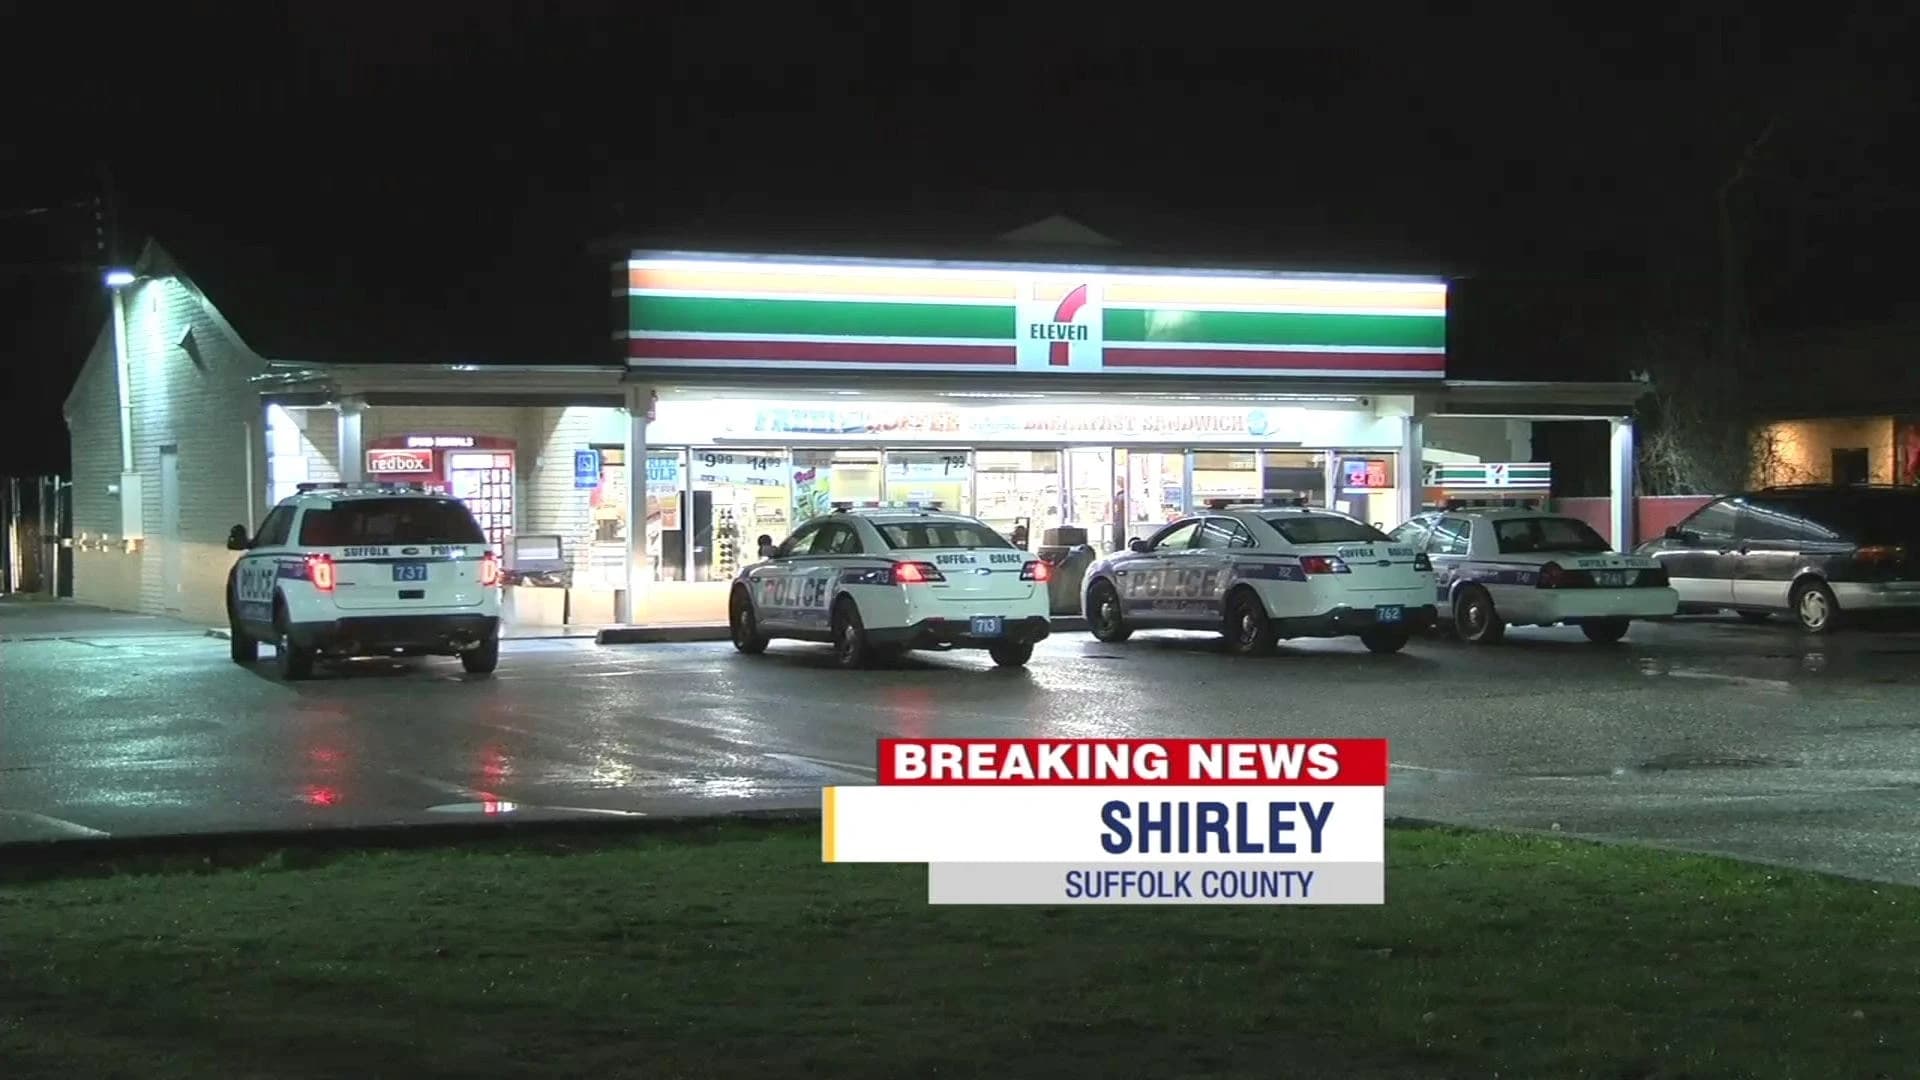 Police: Shirley knifepoint robbery not linked to pattern